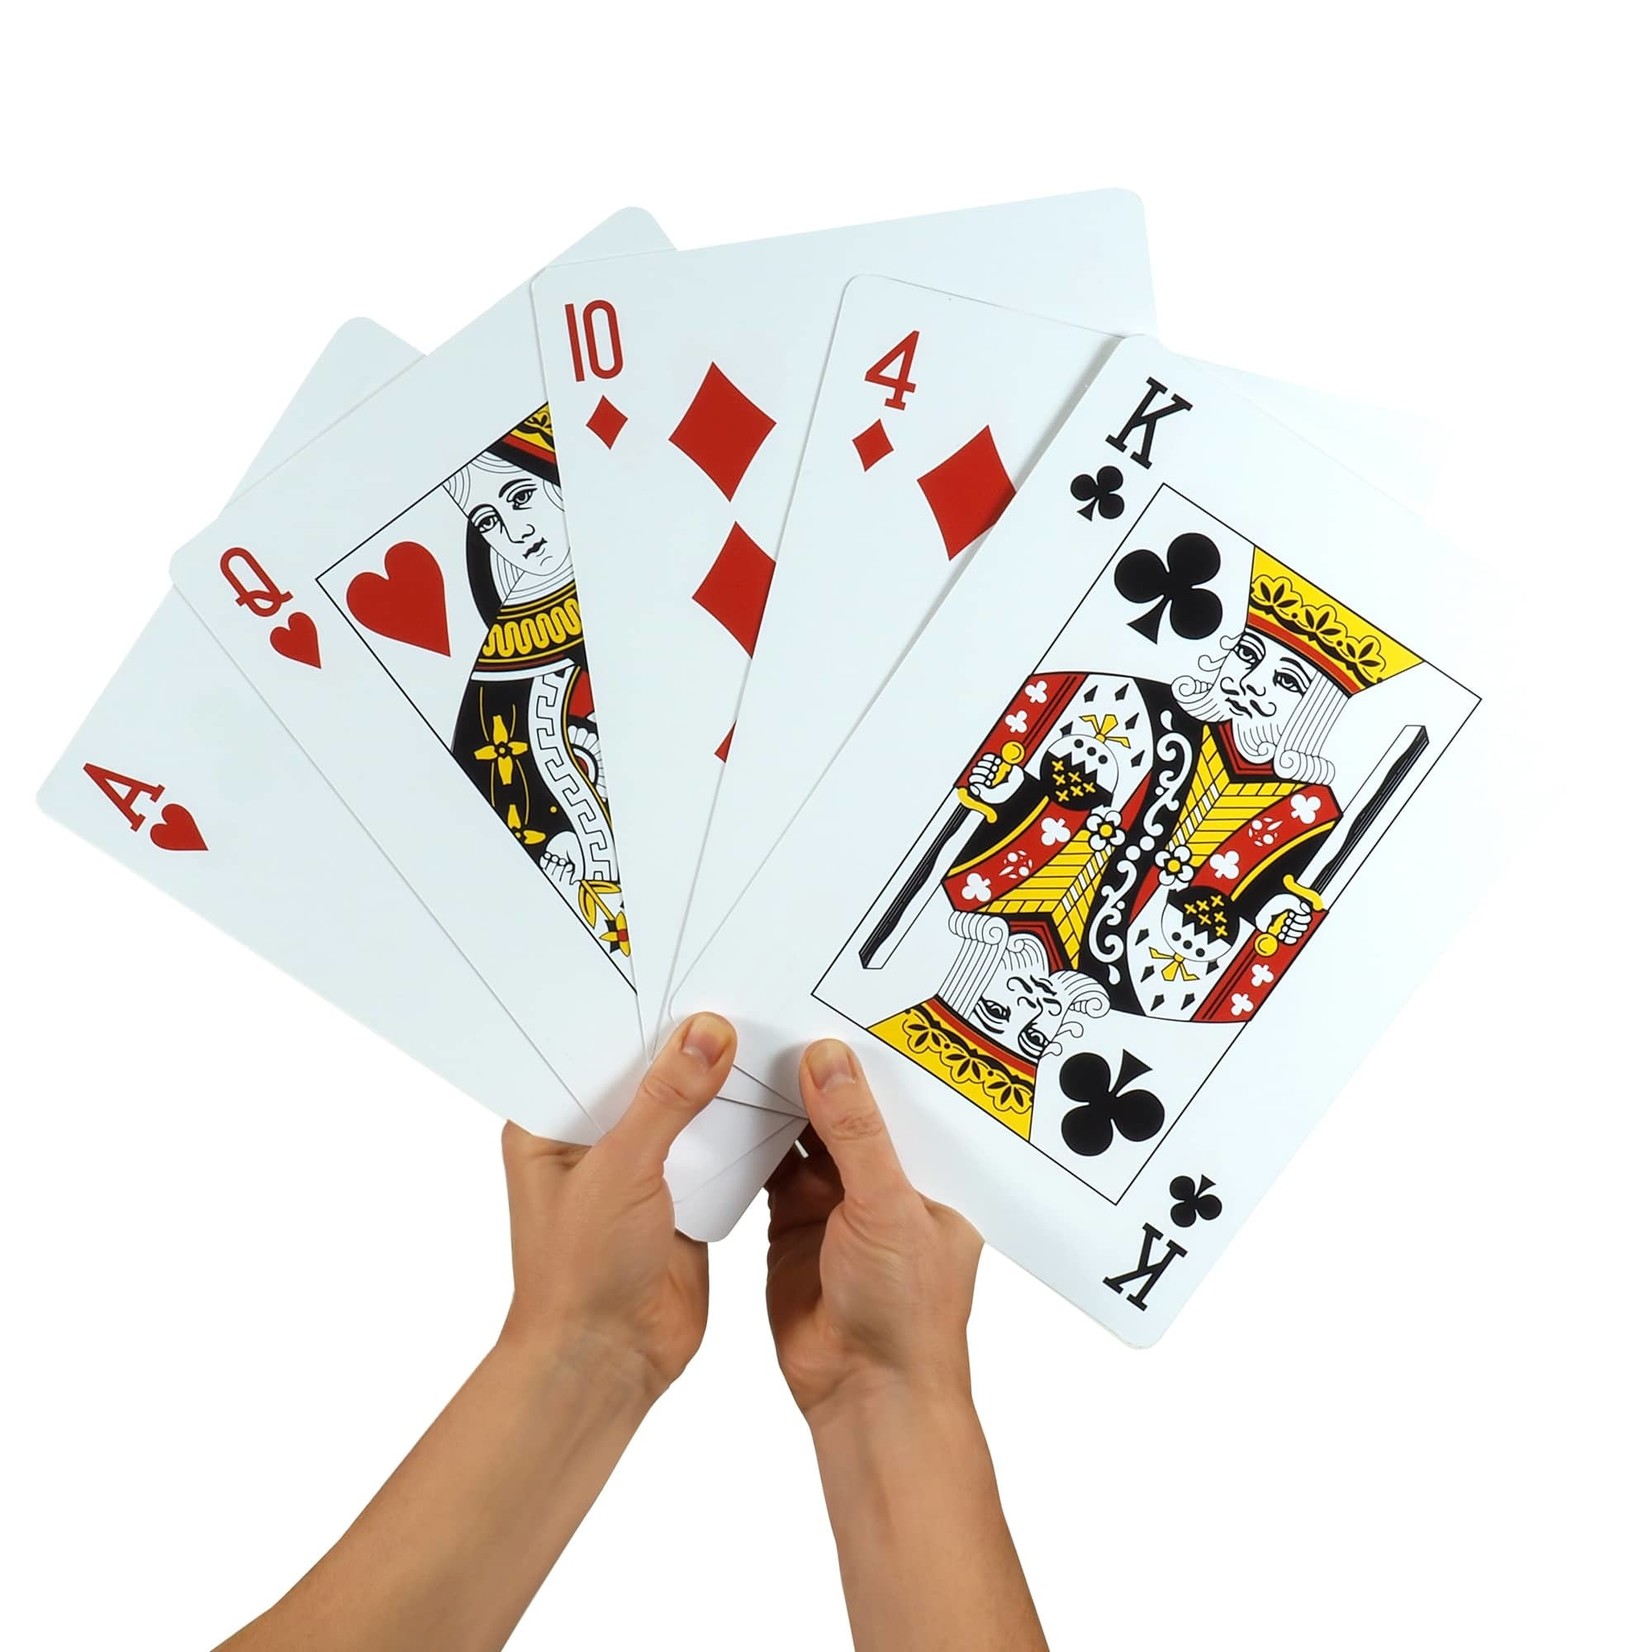 Schylling Toys Jumbo Playing Cards